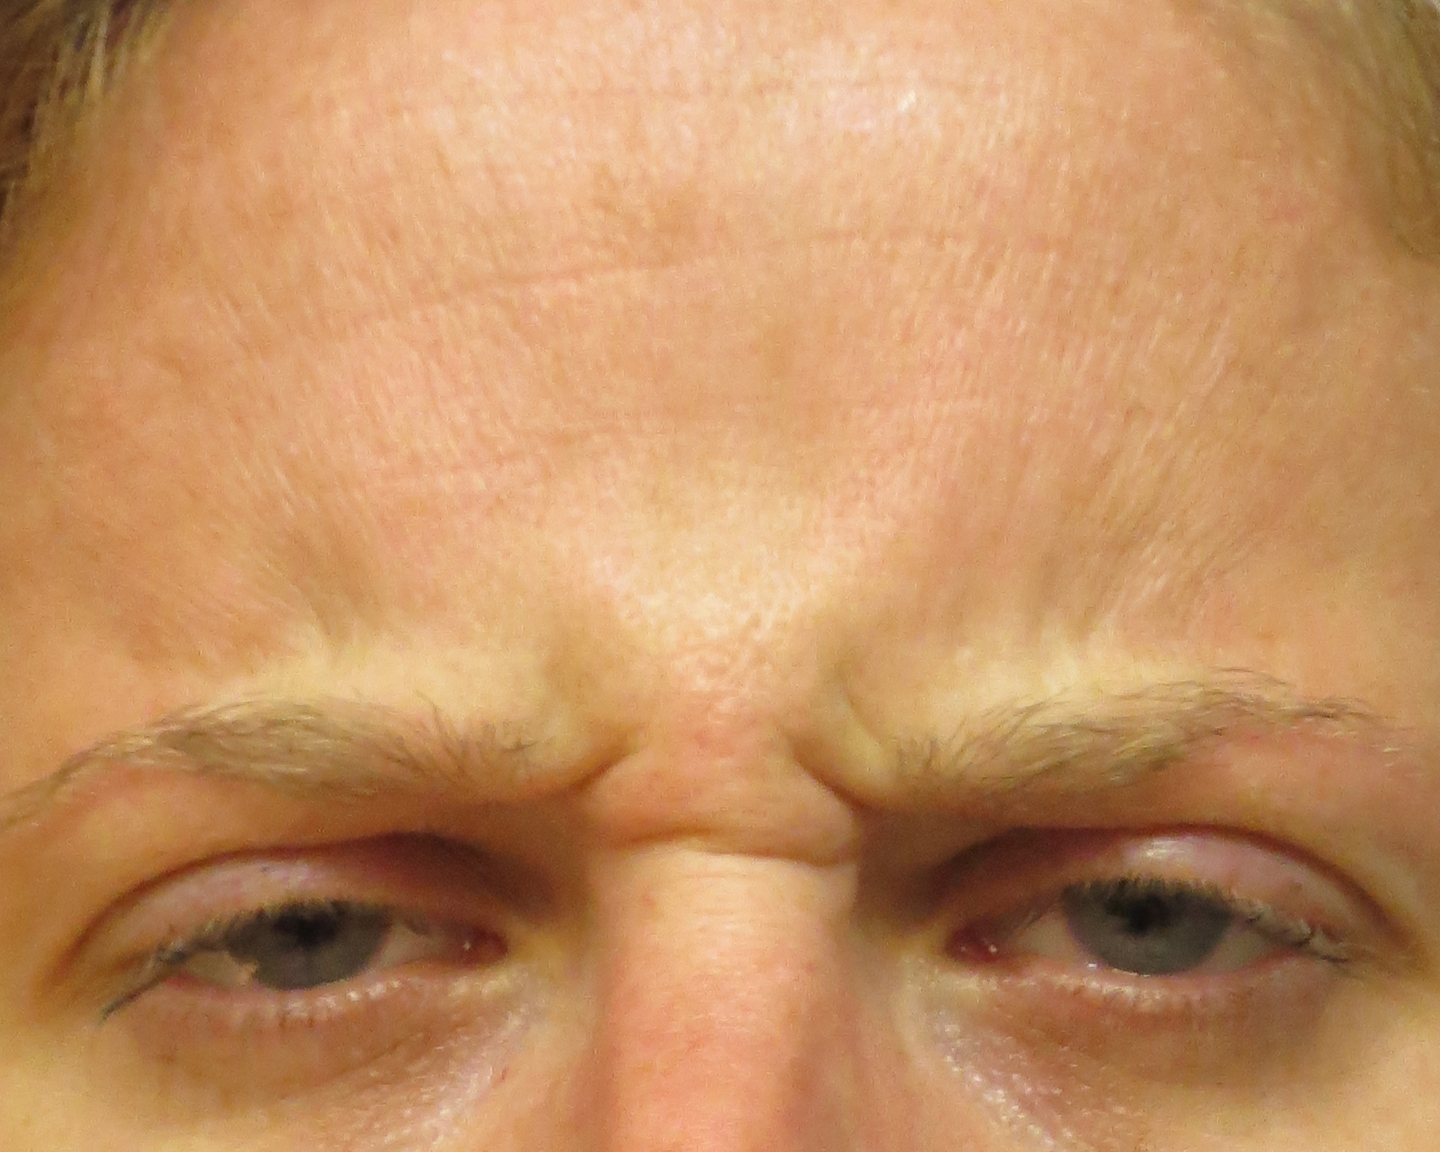 Injectable Wrinkle Reducers Before and After | Dr. Thomas Hubbard